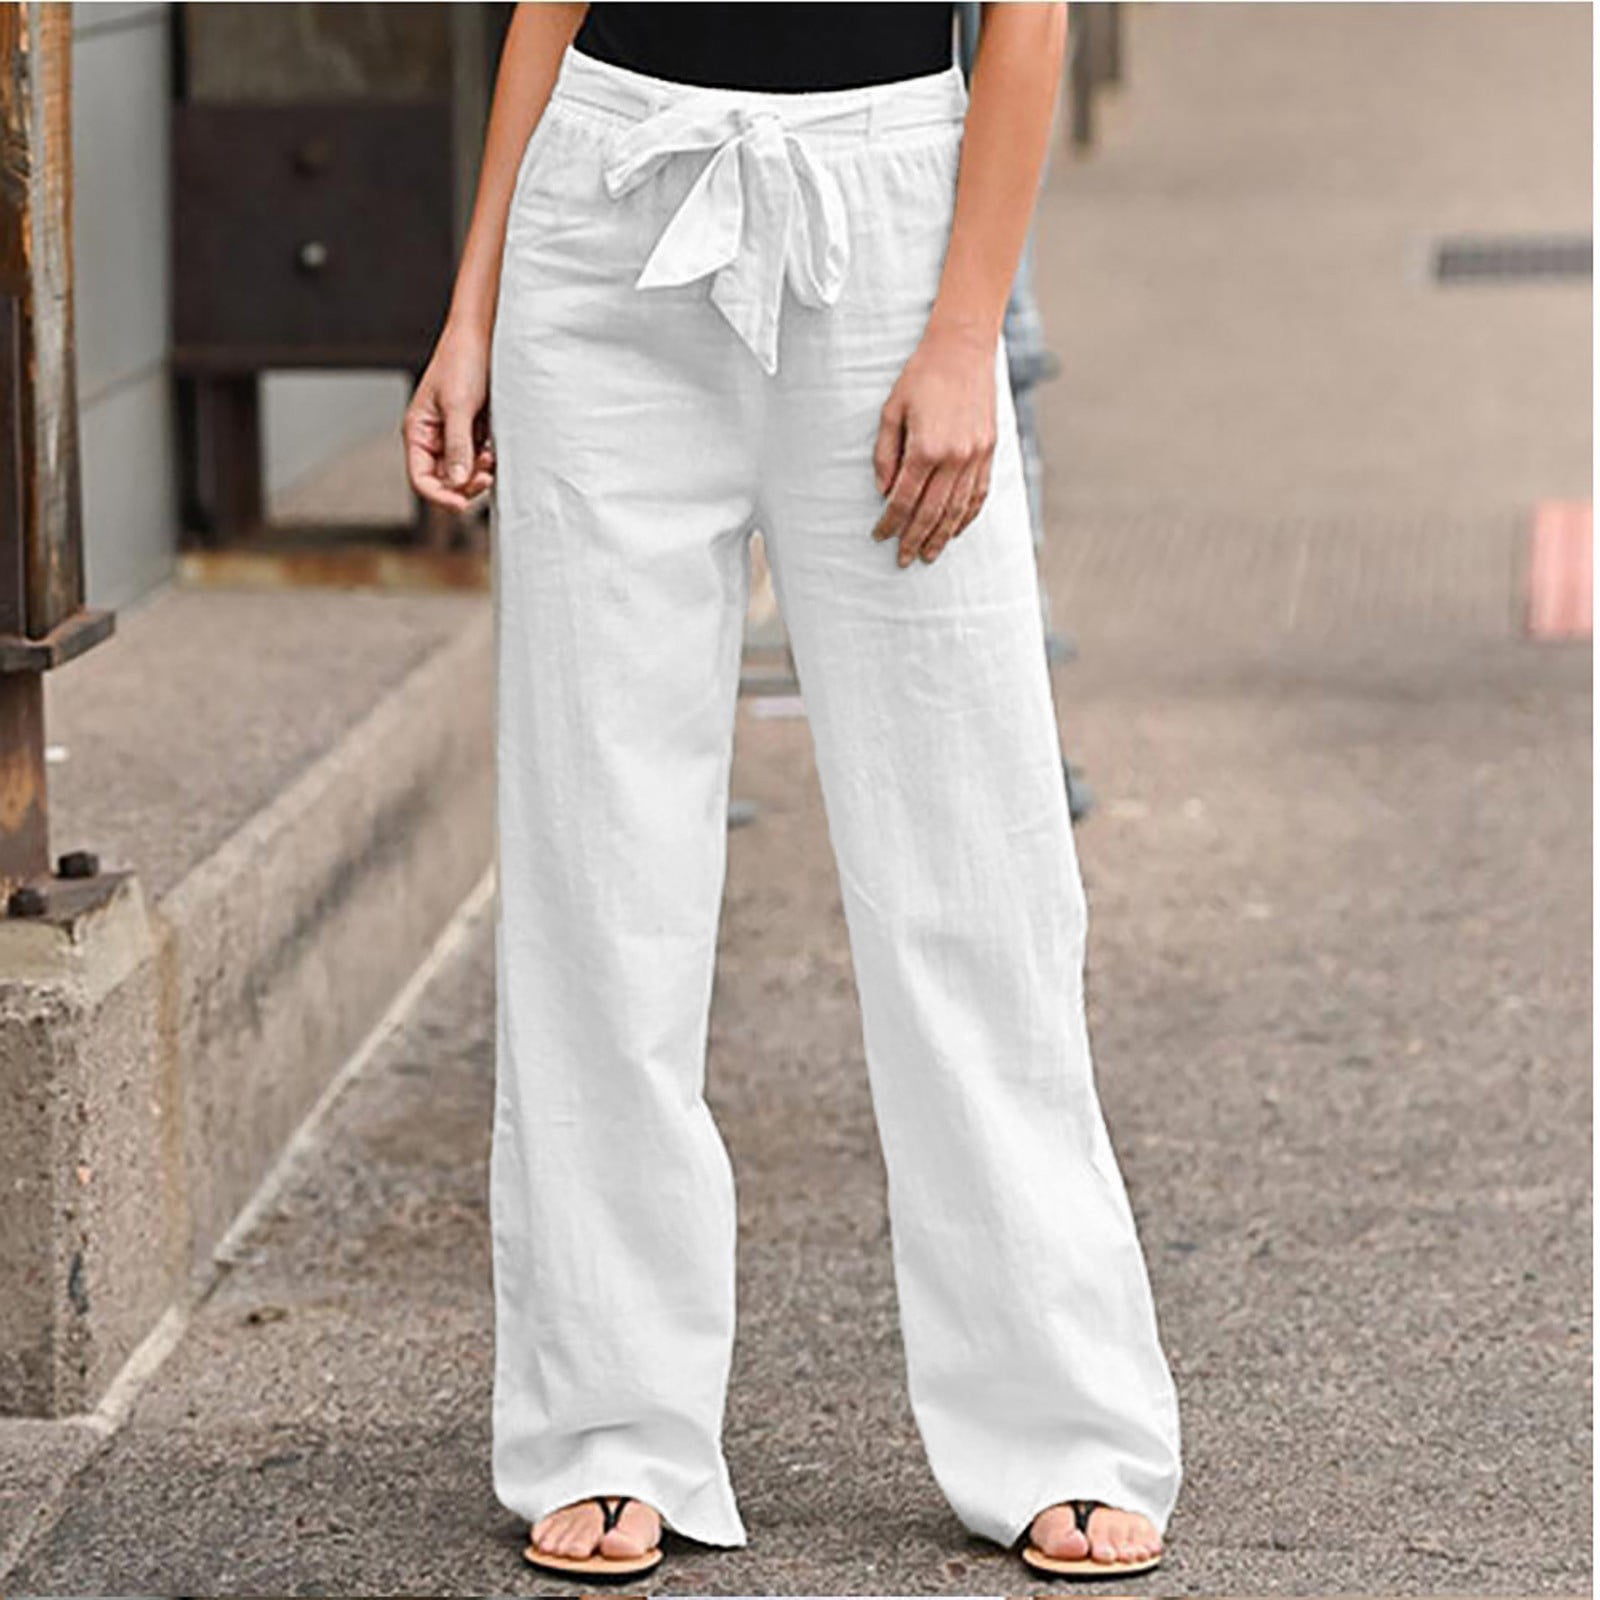 RYDCOT Women Pants Clearance Fashion Women Solid Color Linen Sashes ...